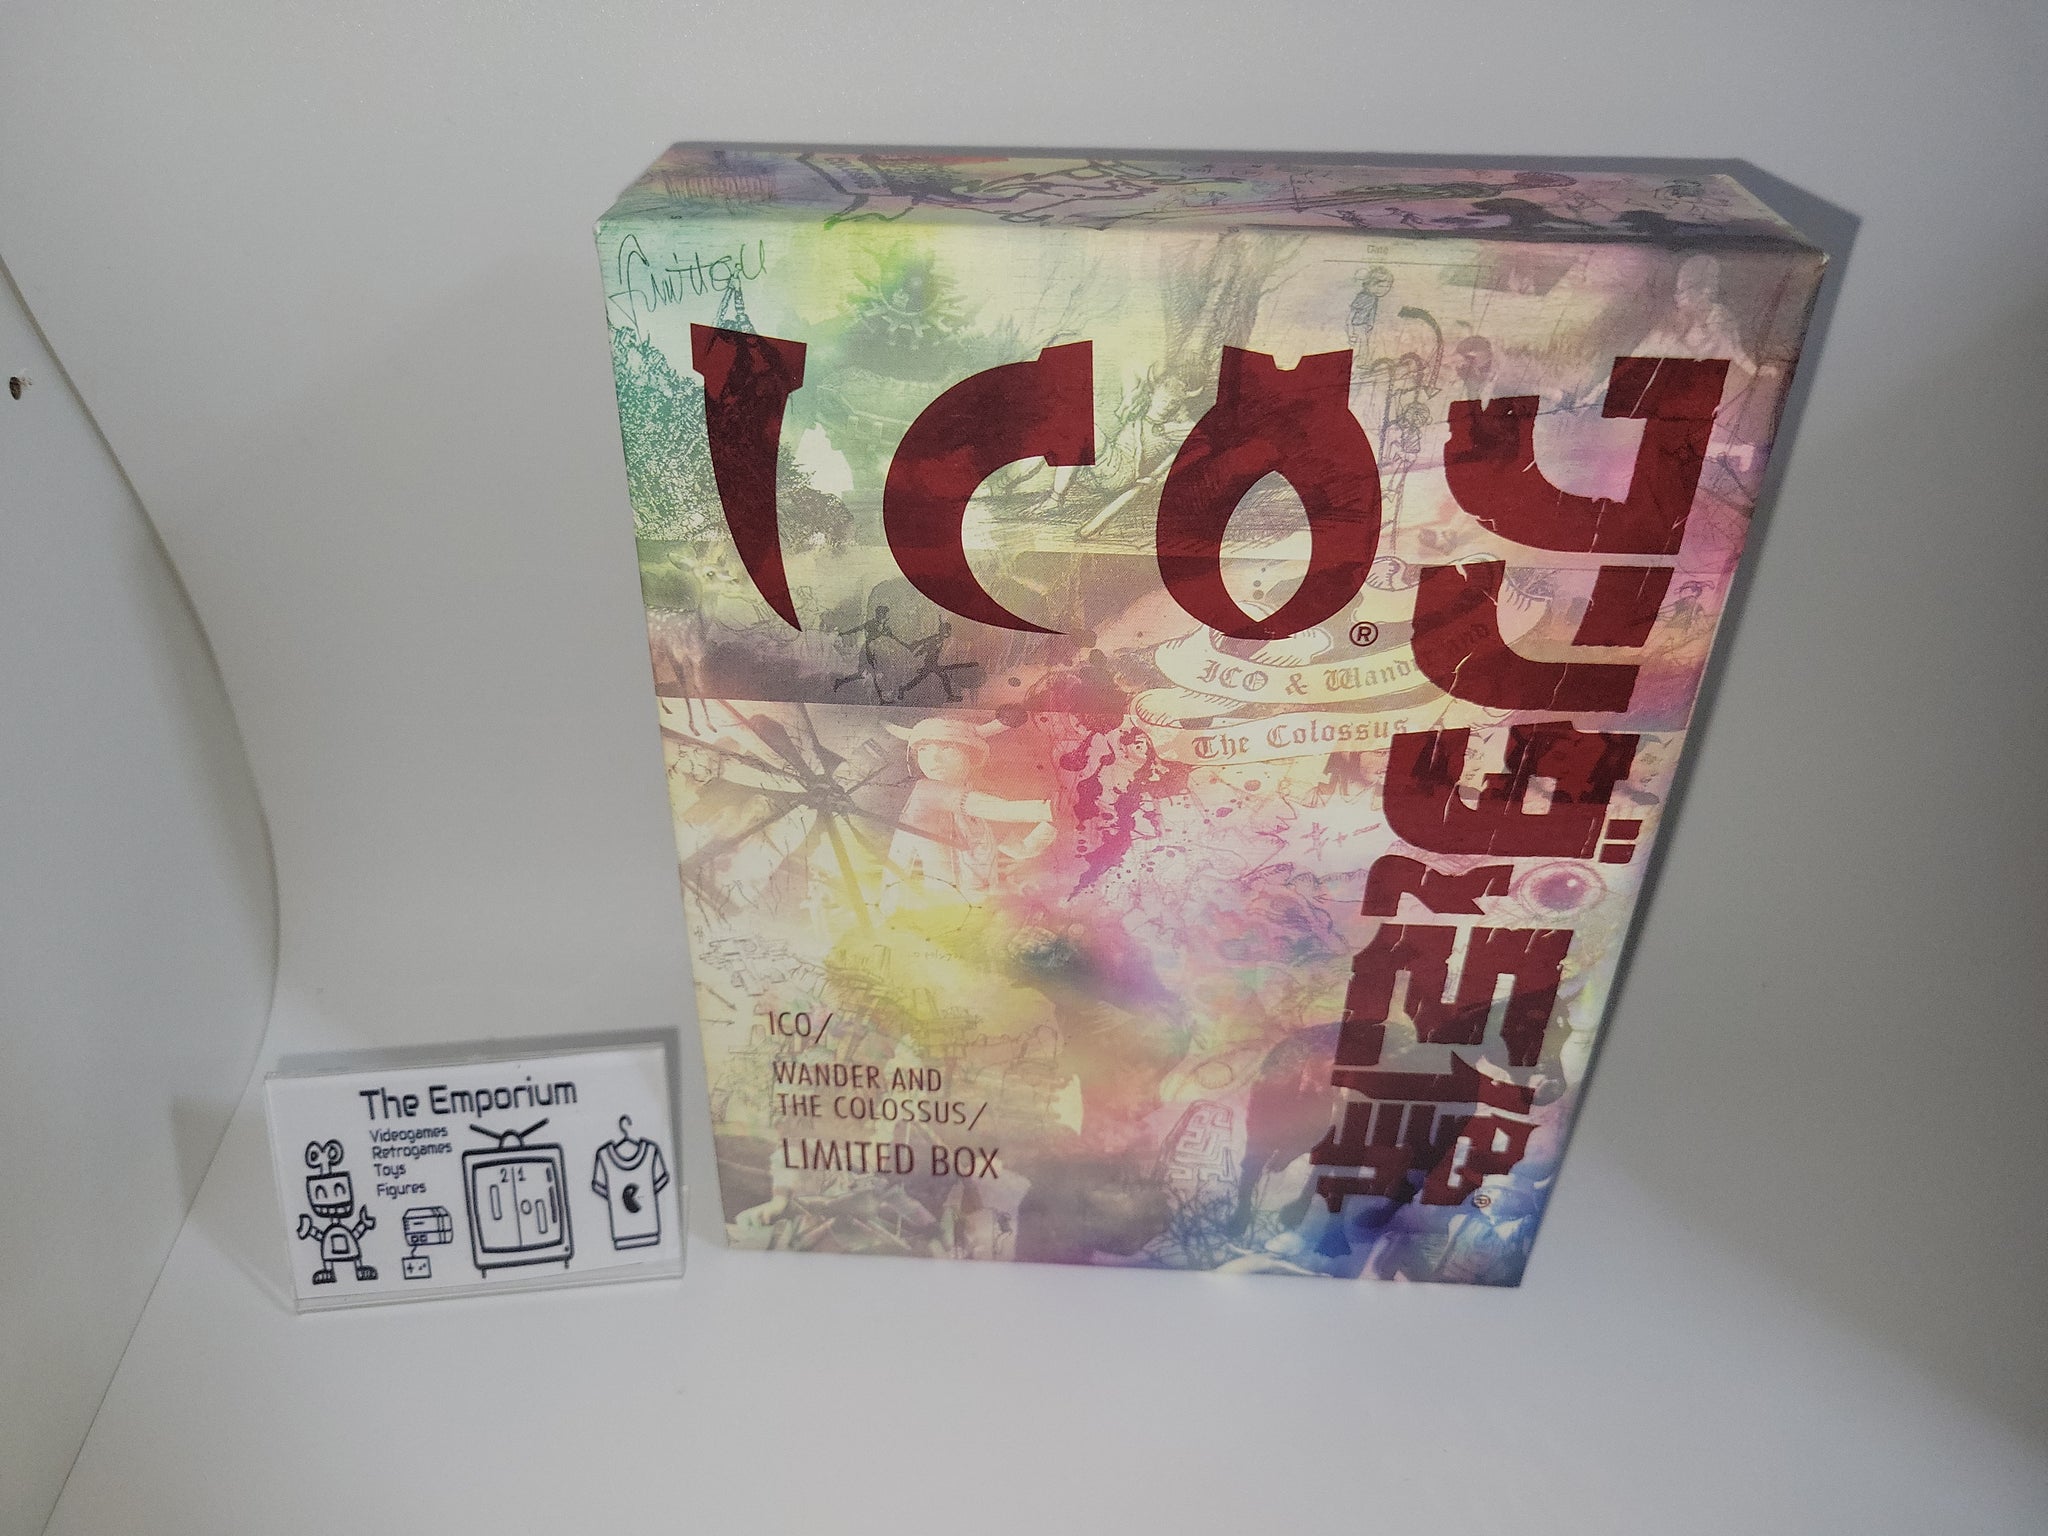 ICO and Shadow of the Colossus PS3 Limited Edition From Japan